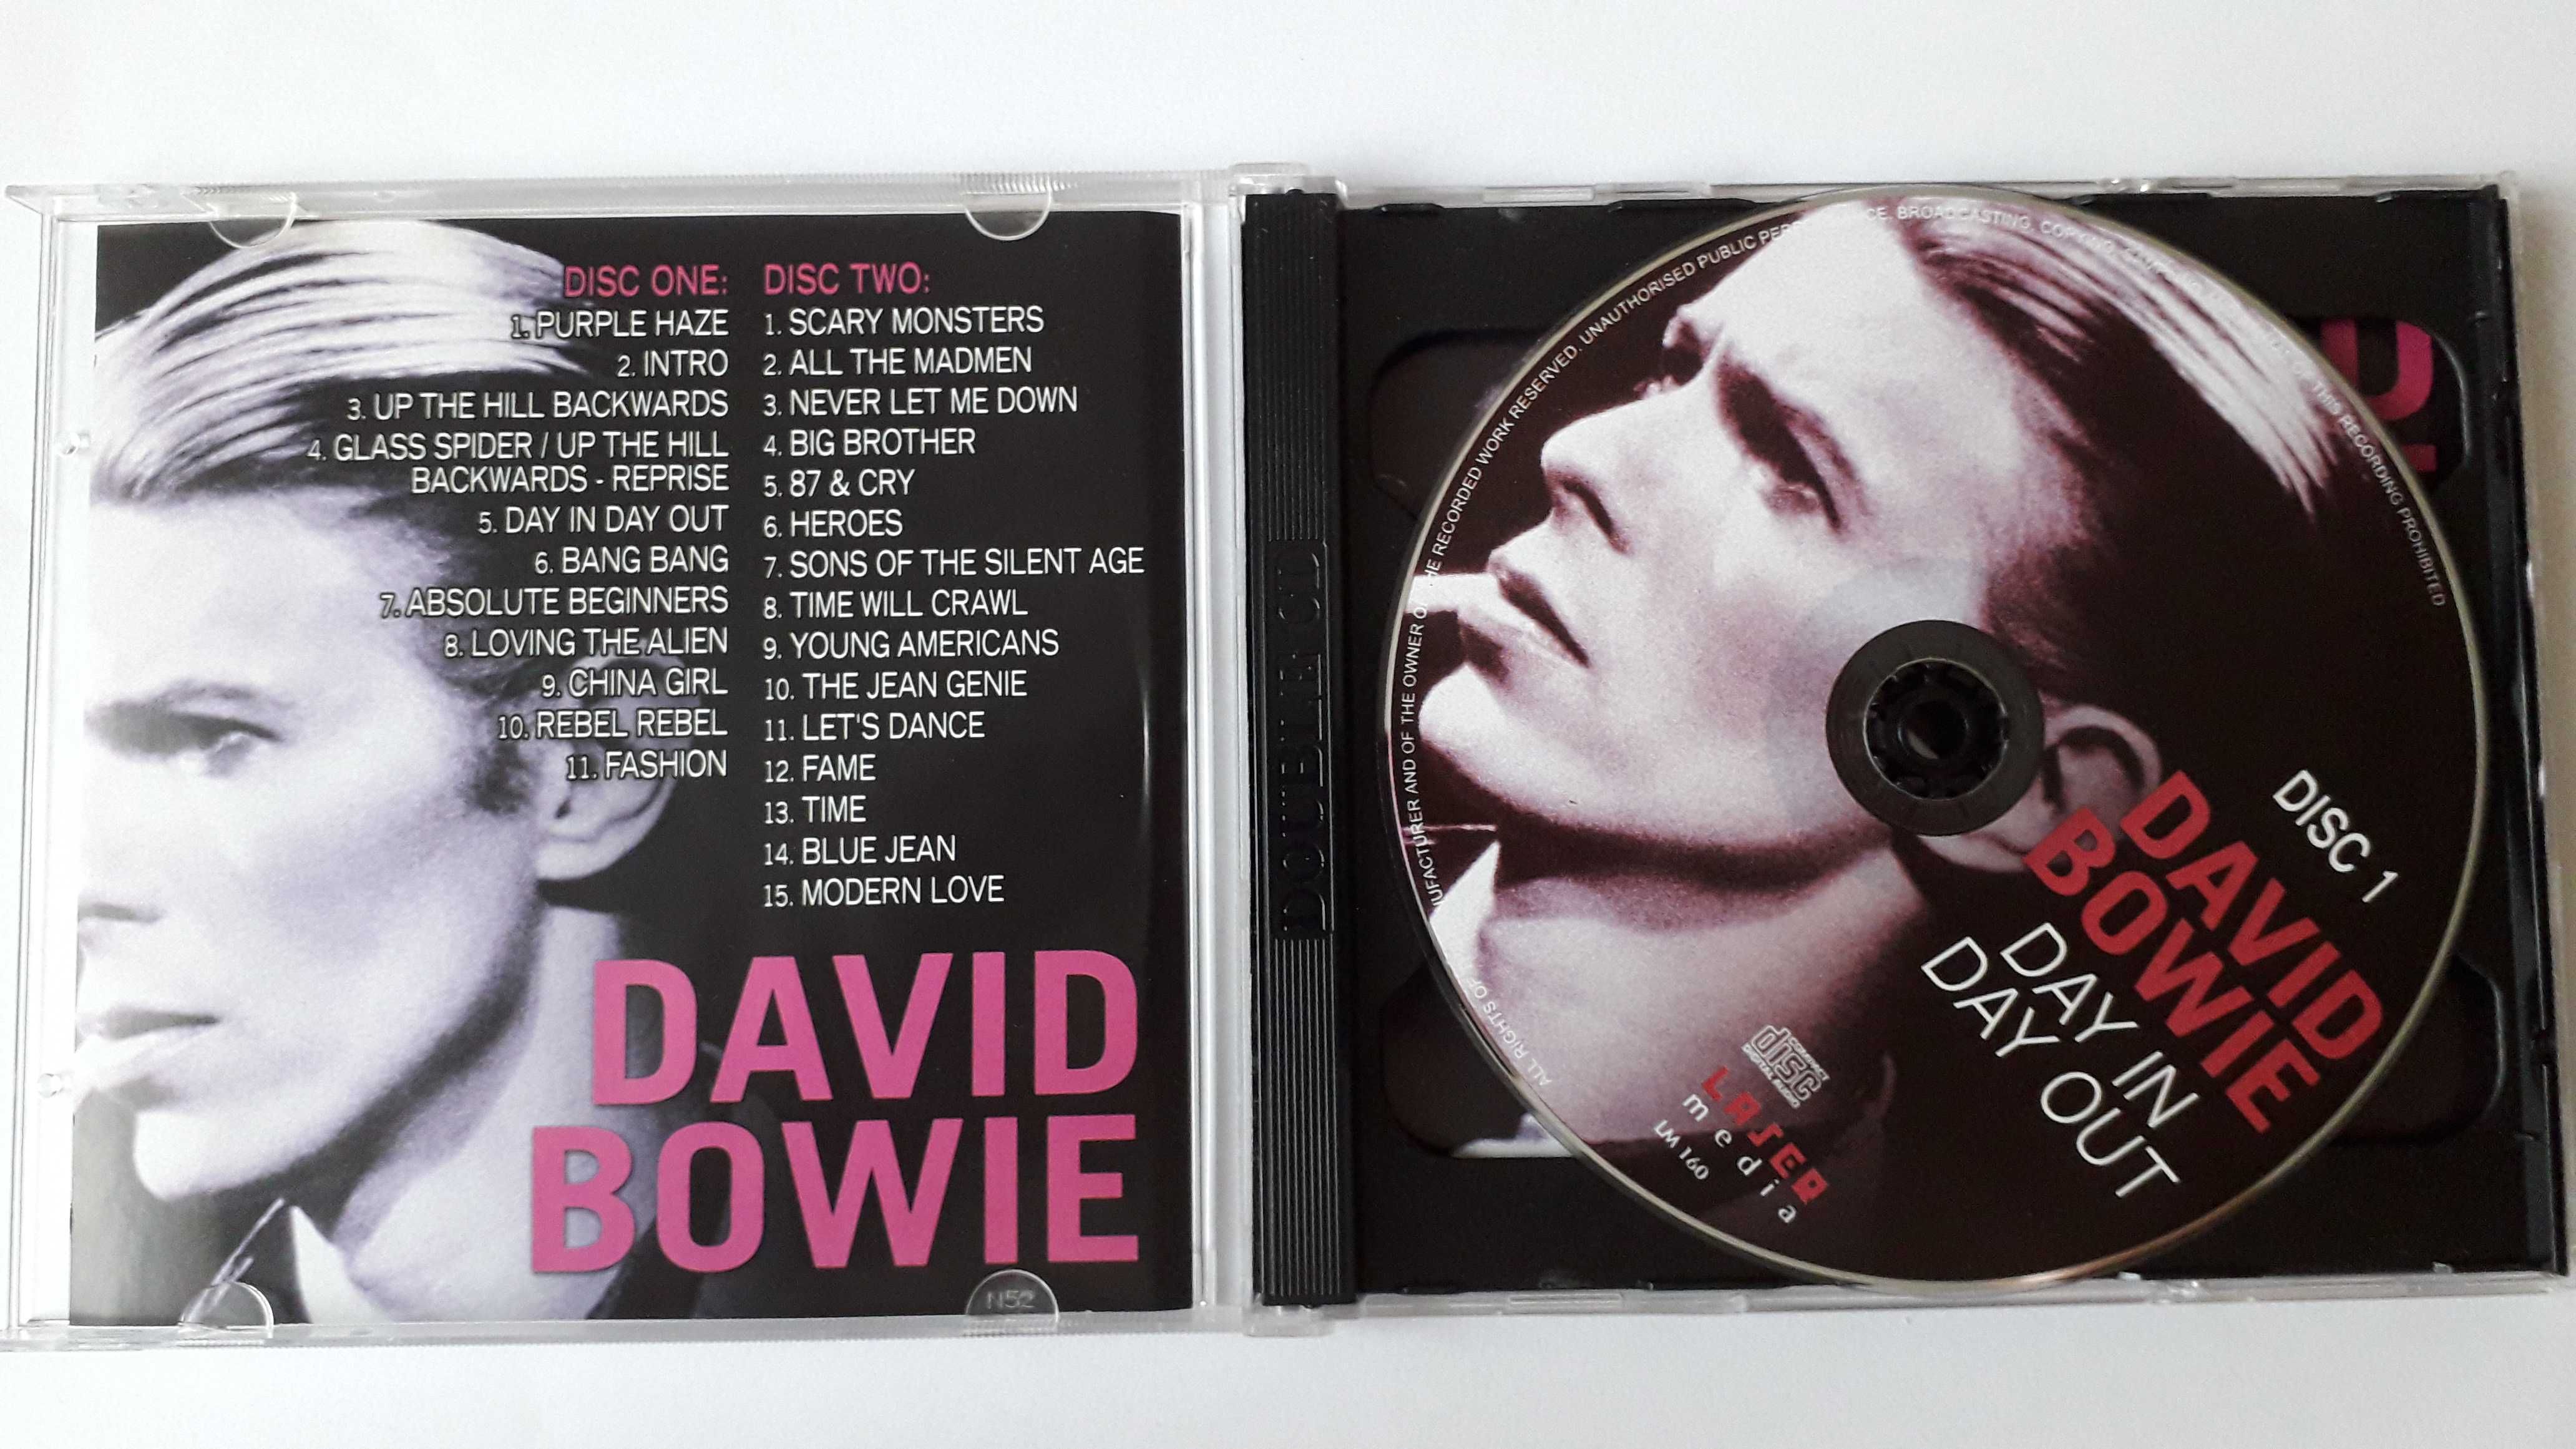 David Bowie - Day in day out Radio Broadcast 1987 2CD